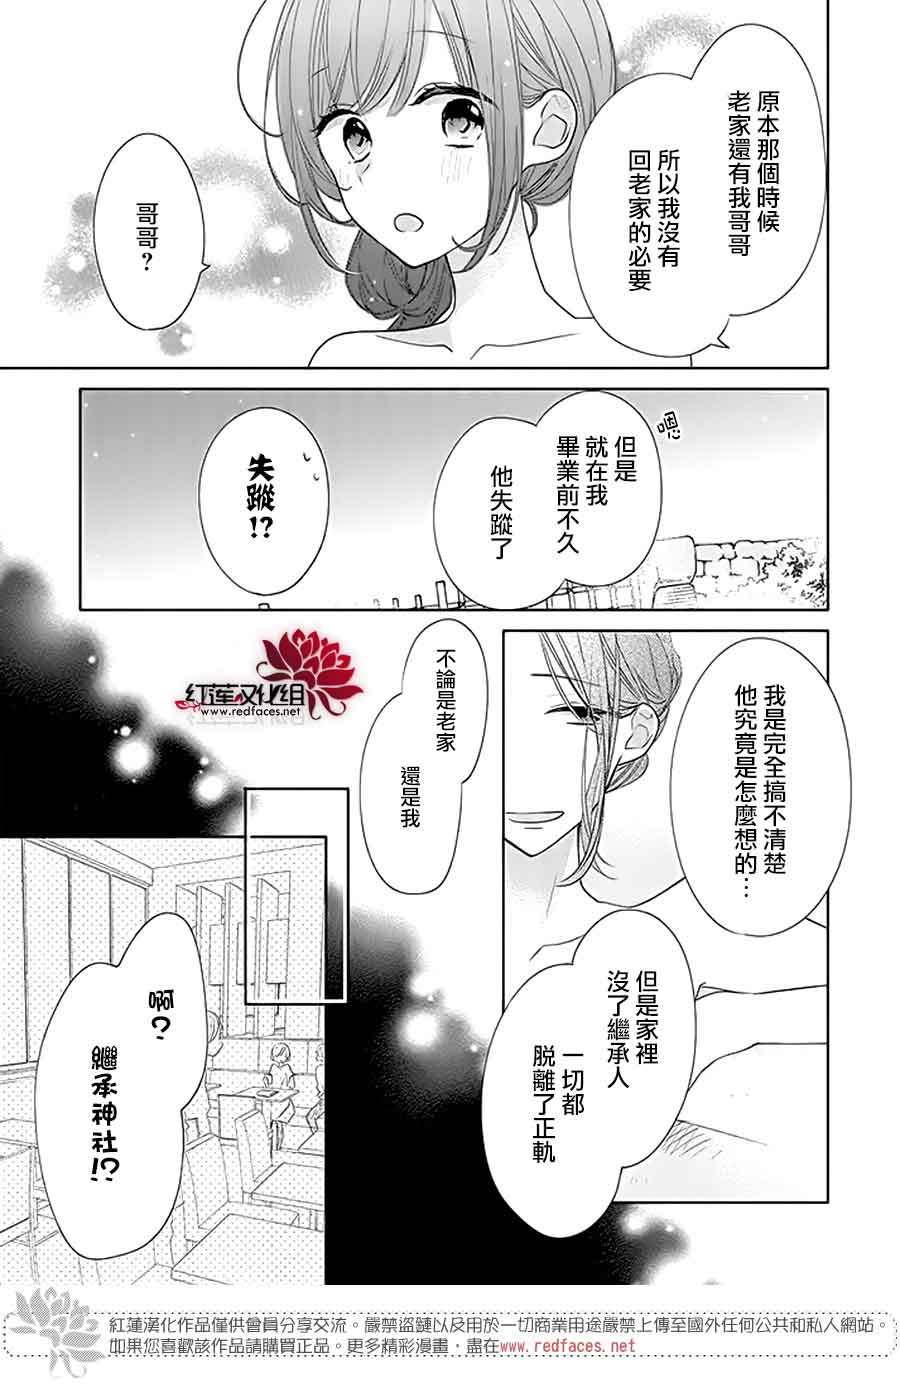 If given a second chance - 29話 - 3